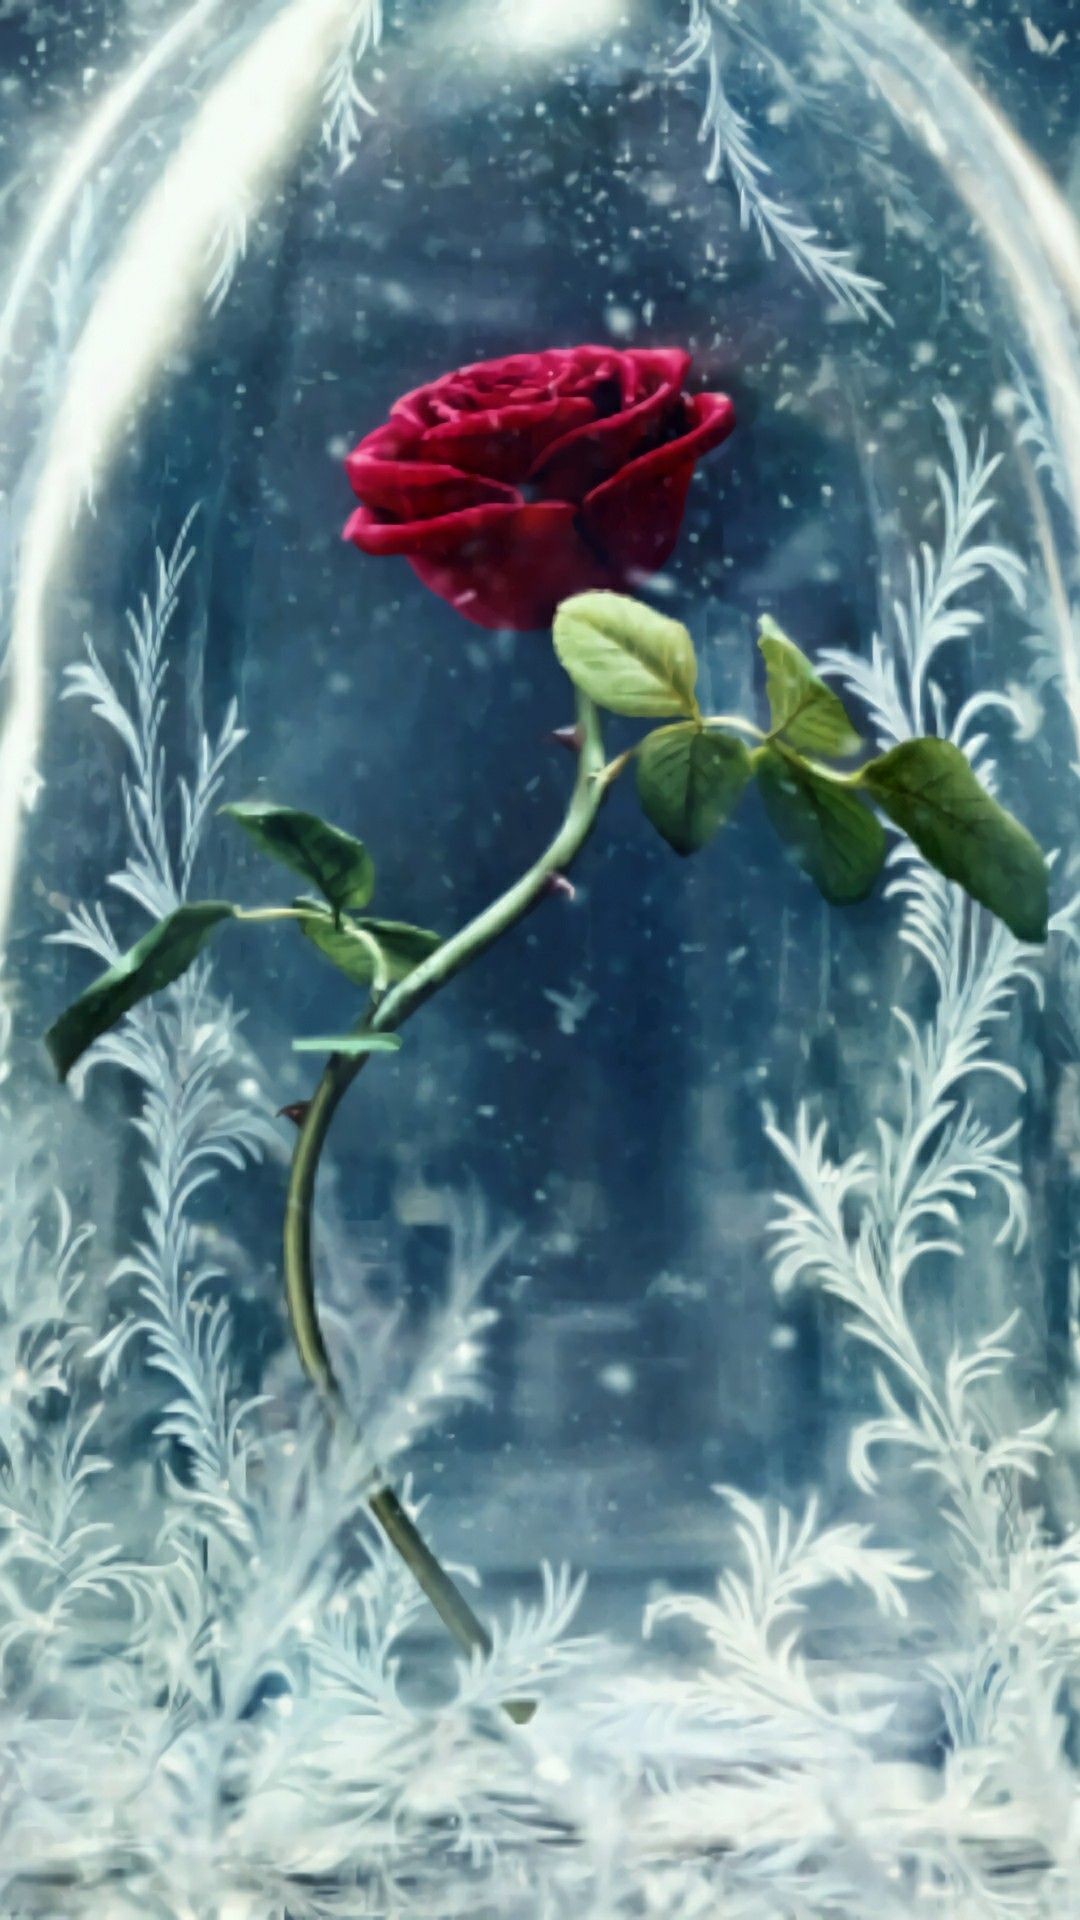 1080x1920 Mickey Mouse Wallpaper, Disney Wallpaper, Iphone Wallpaper, Beauty And The  Beast Art,